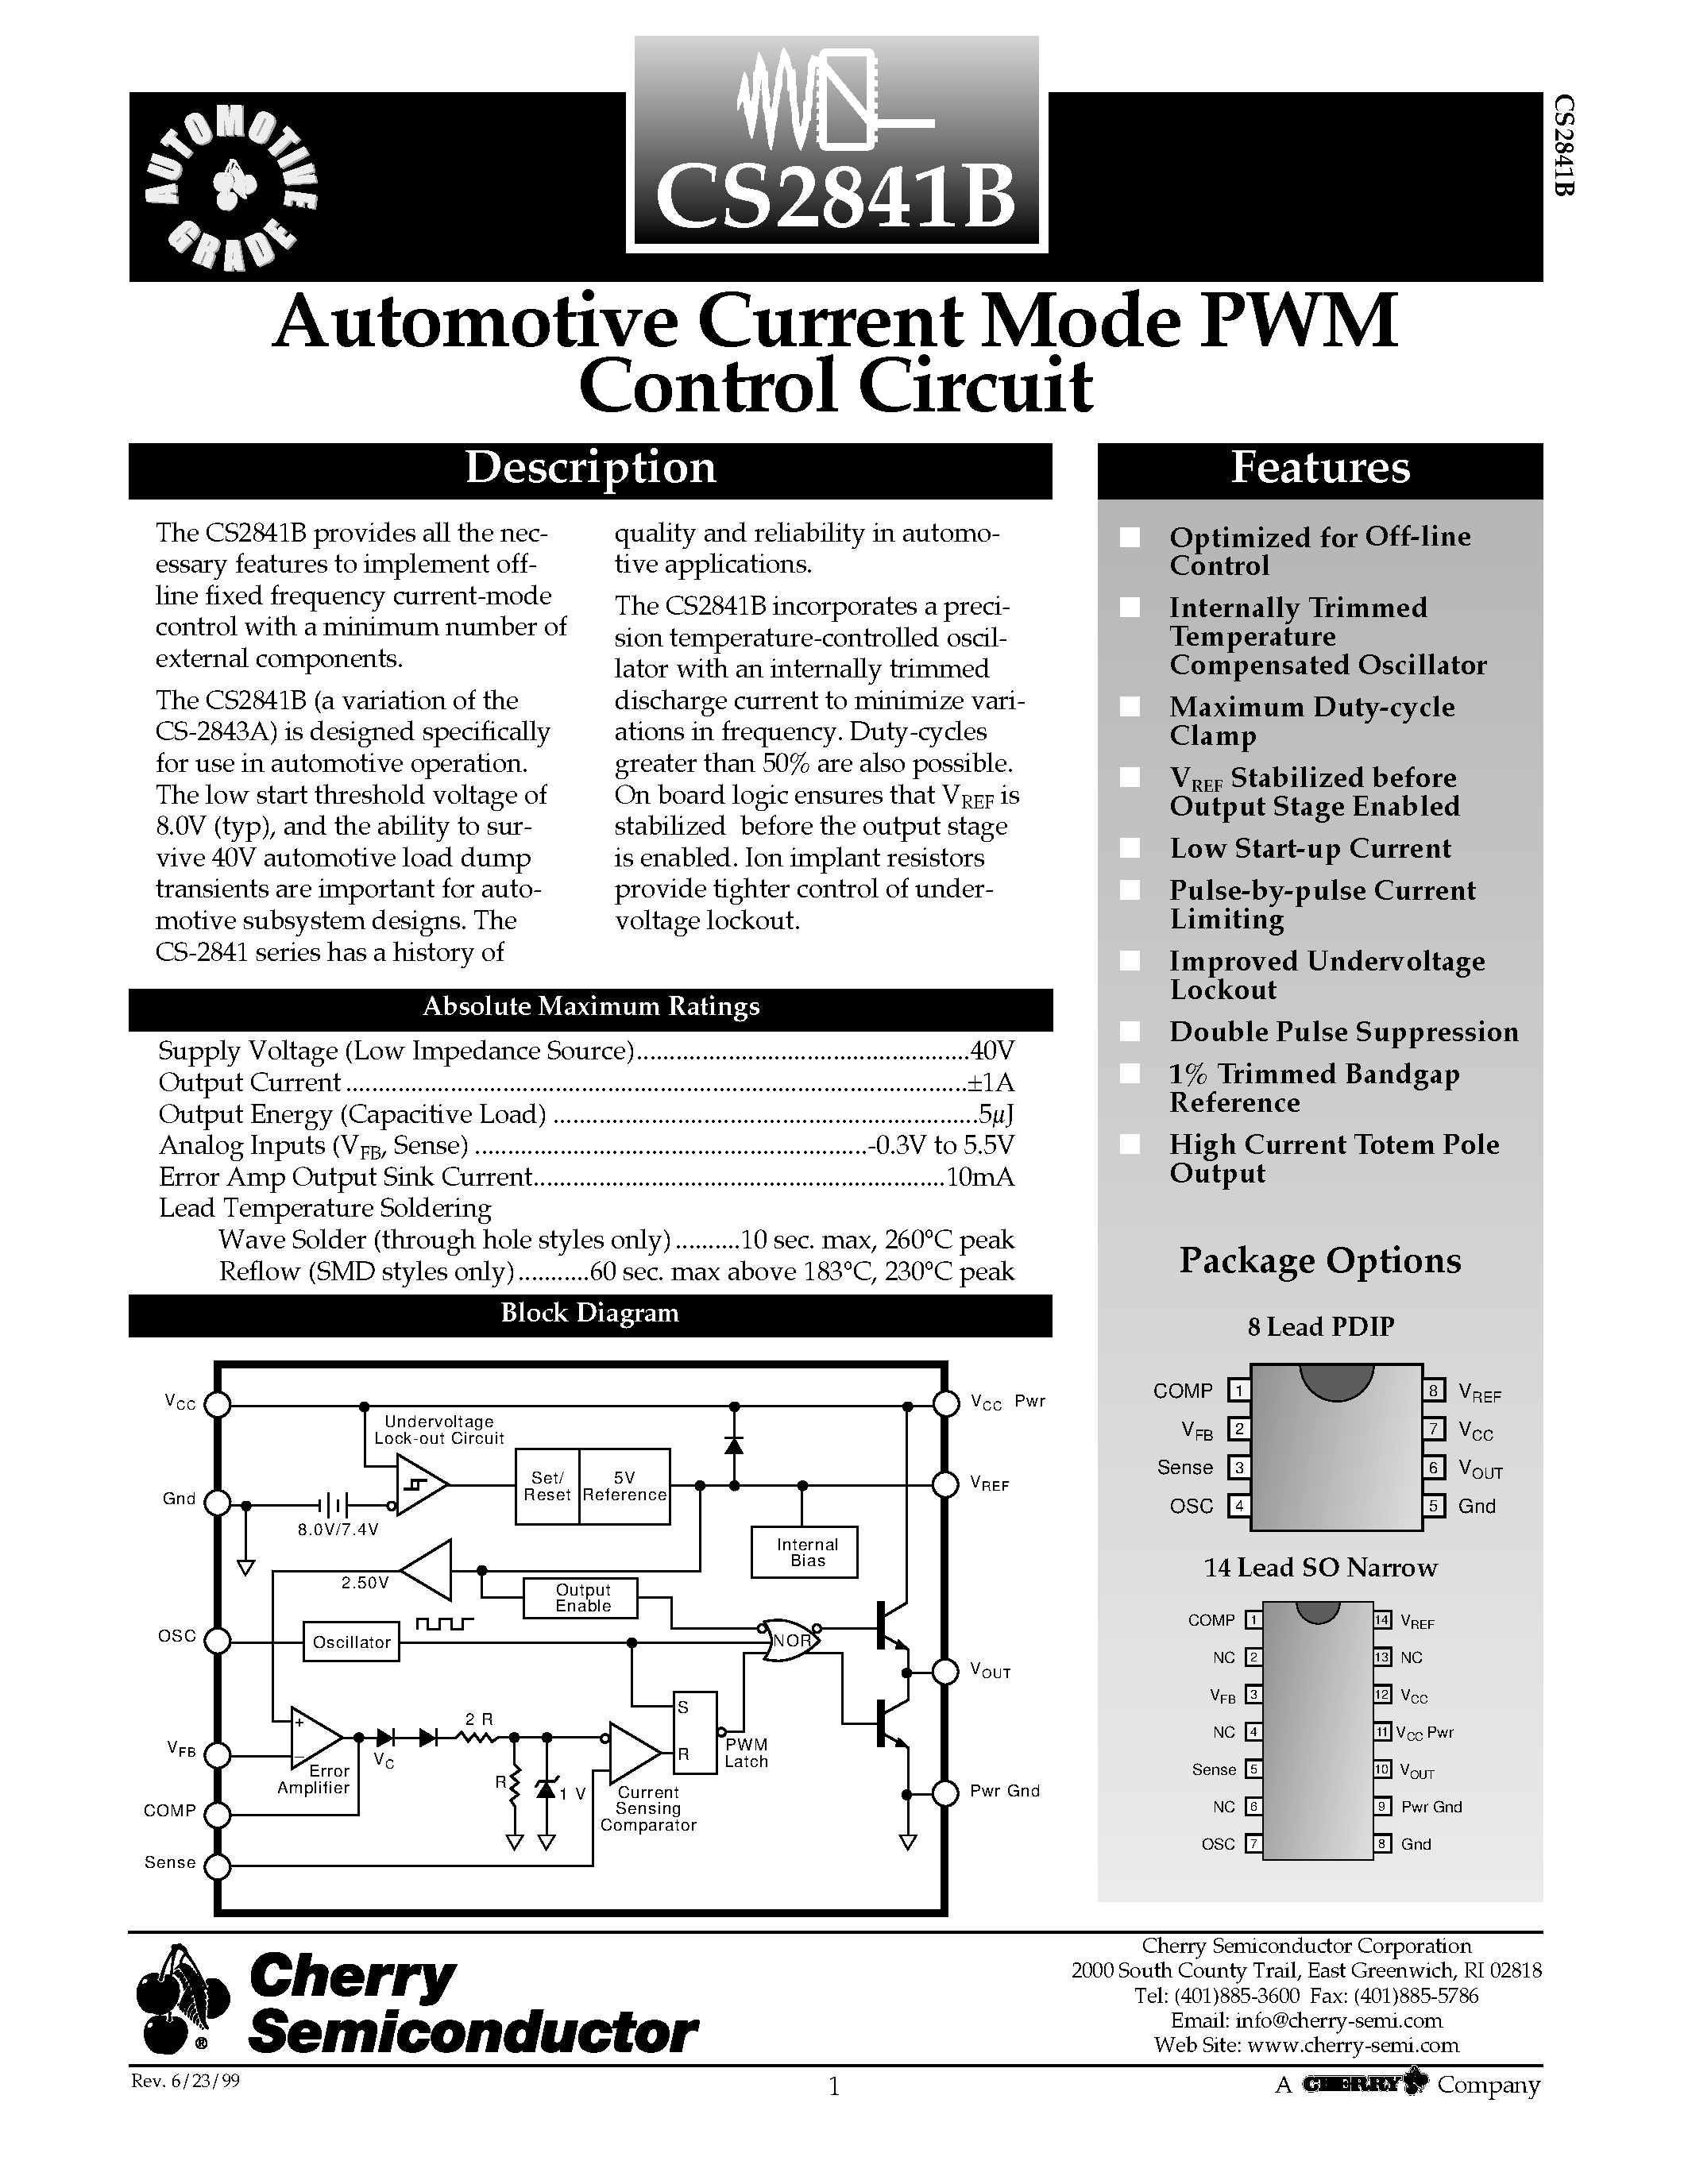 Datasheet CS2841BED14 - Automotive Current Mode PWM Control Circuit page 1